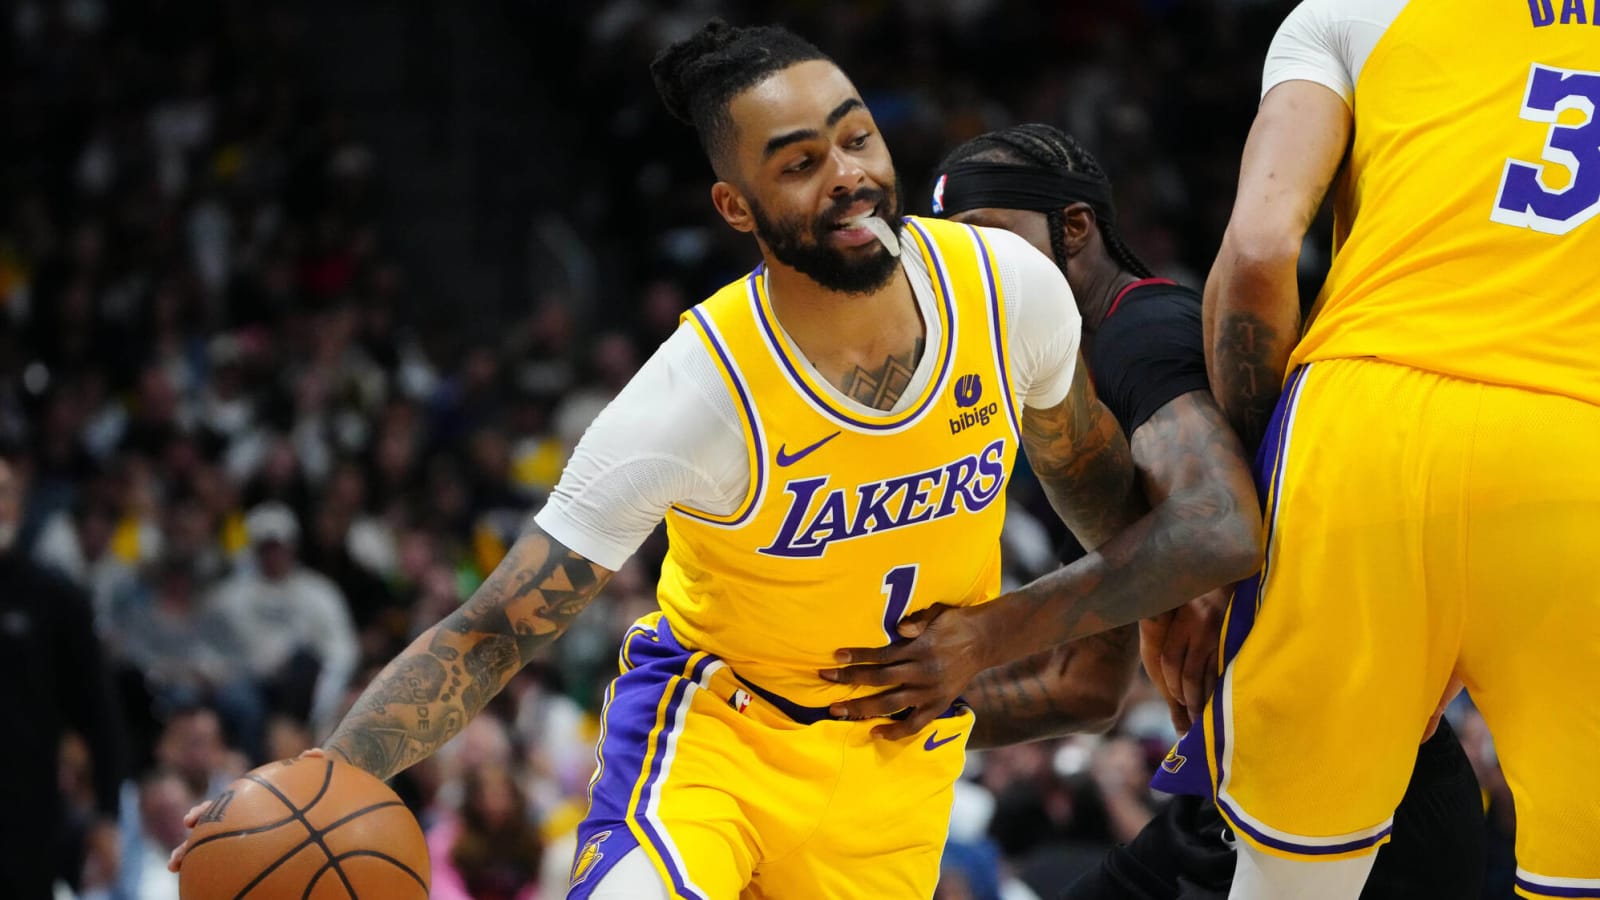 Los Angeles Lakers: D’Angelo Russell Reaches New Playoff Career-High in Game 2 Loss Vs. Denver Nuggets